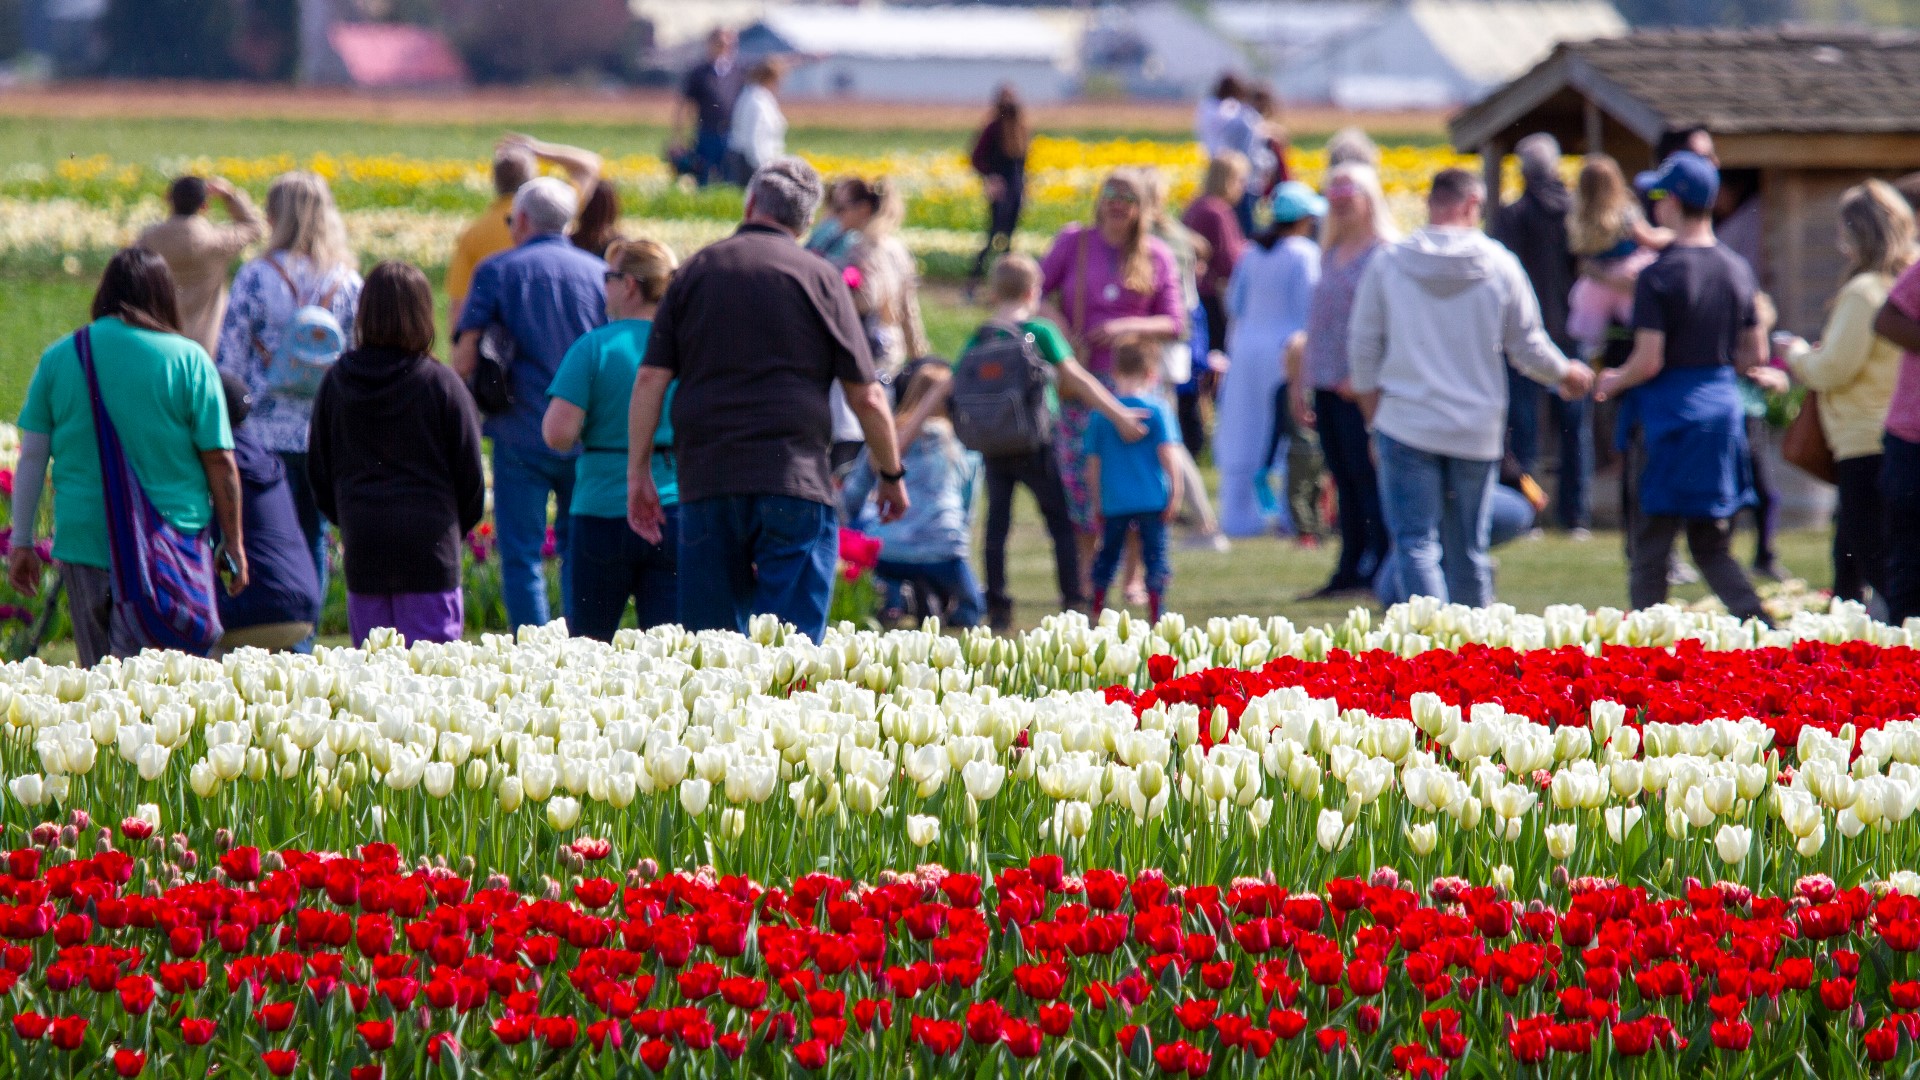 Spring in western Washington means the return of one of the most picturesque attractions in the region, the Skagit Valley Tulip Festival.